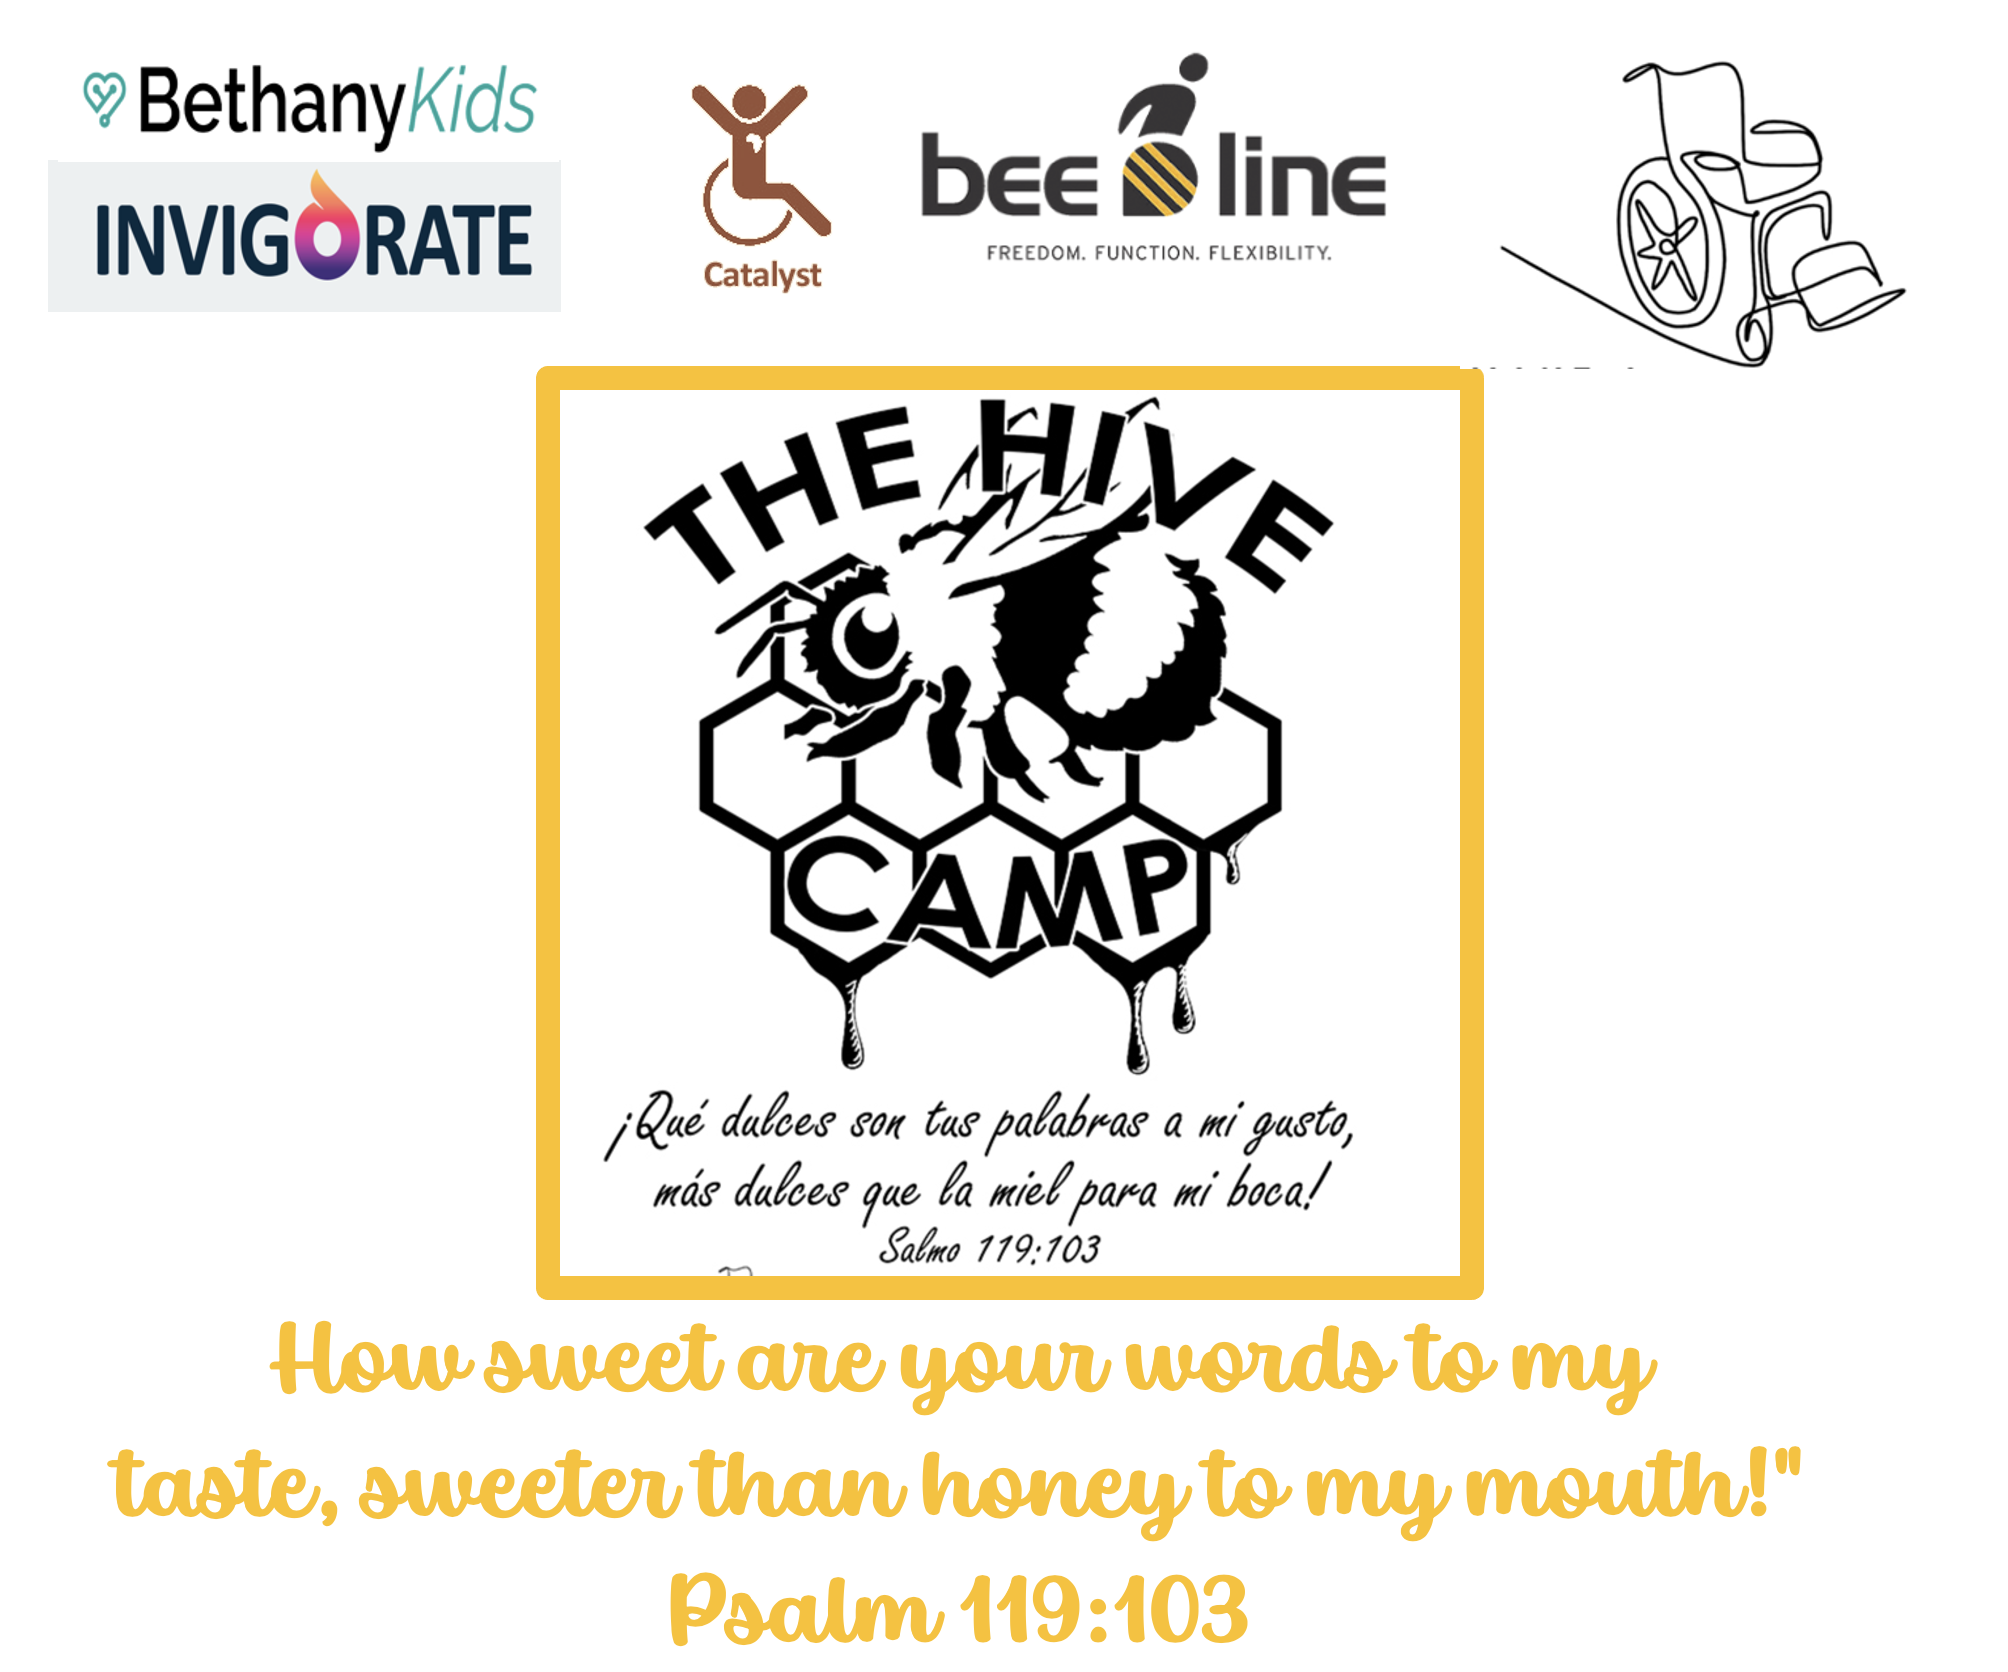 Logos: Bethany Kids, Invigorate, Catalyst, BeeLine, Wheel Difference, The Hive Camp with verse, "How sweet are your words to my taste, sweeter than honey to my mouth!"